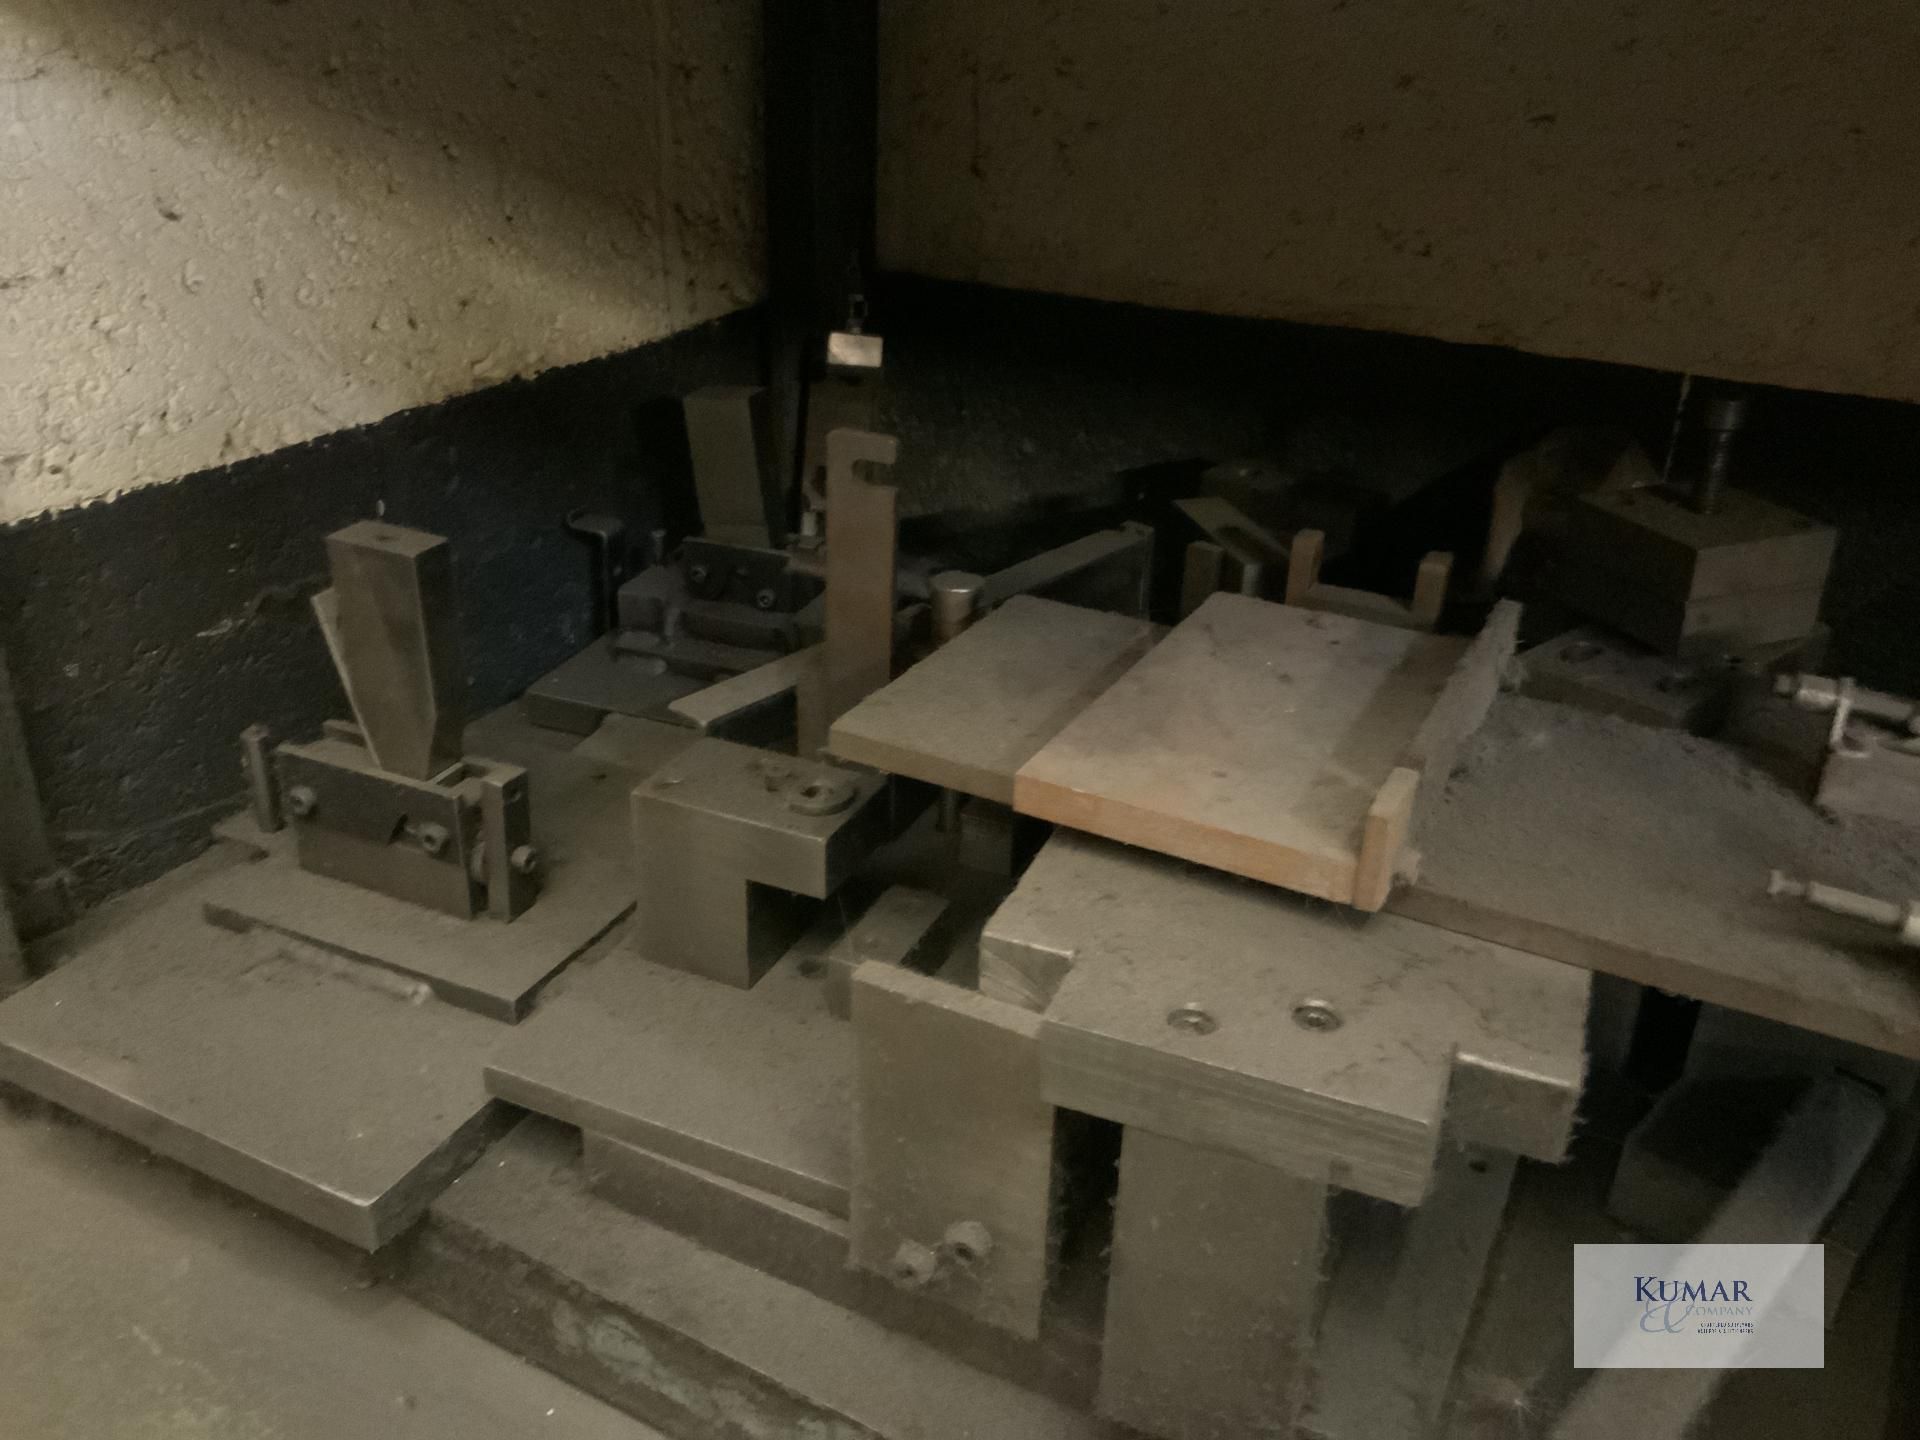 Machine tooling as imaged  Collection Day – Tuesday 27th February Unit 4 Goscote Industrial - Image 5 of 7